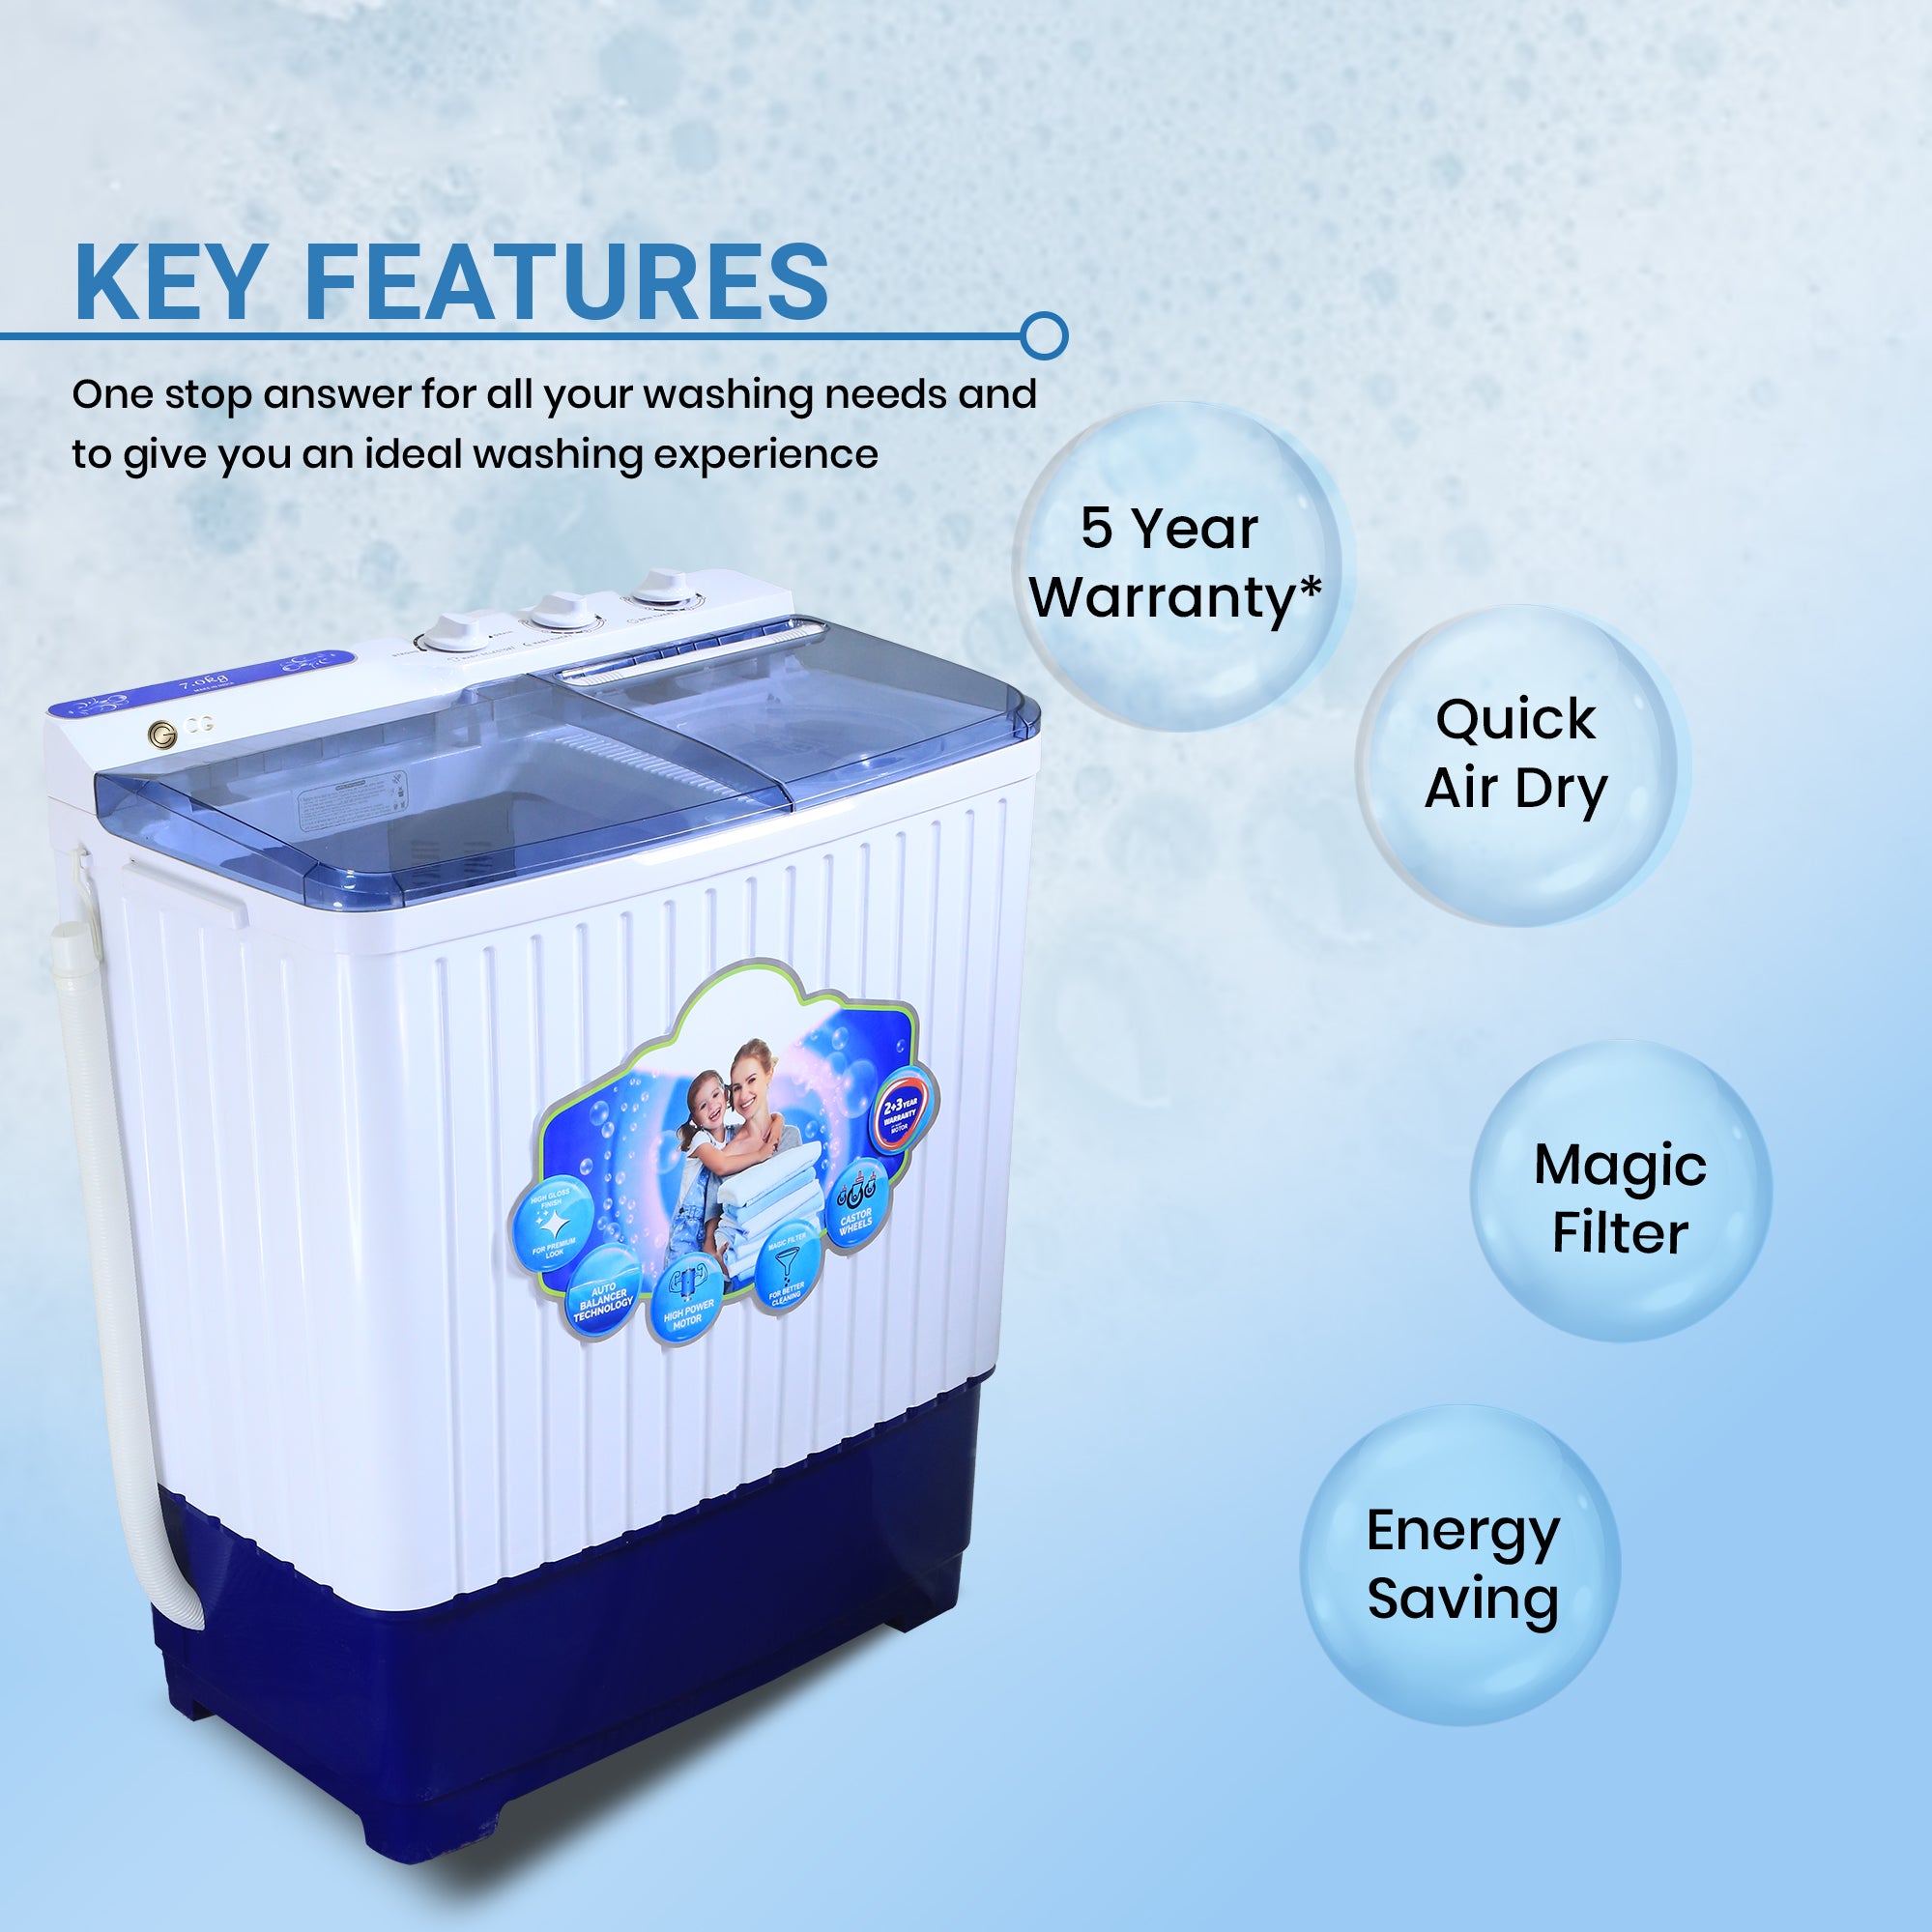 Cine Gold 7 Kg 5 Star Quick Air Dry Semi-Automatic Top Loading Washing Machine: Blue Transparent Top with Rat Away Feature